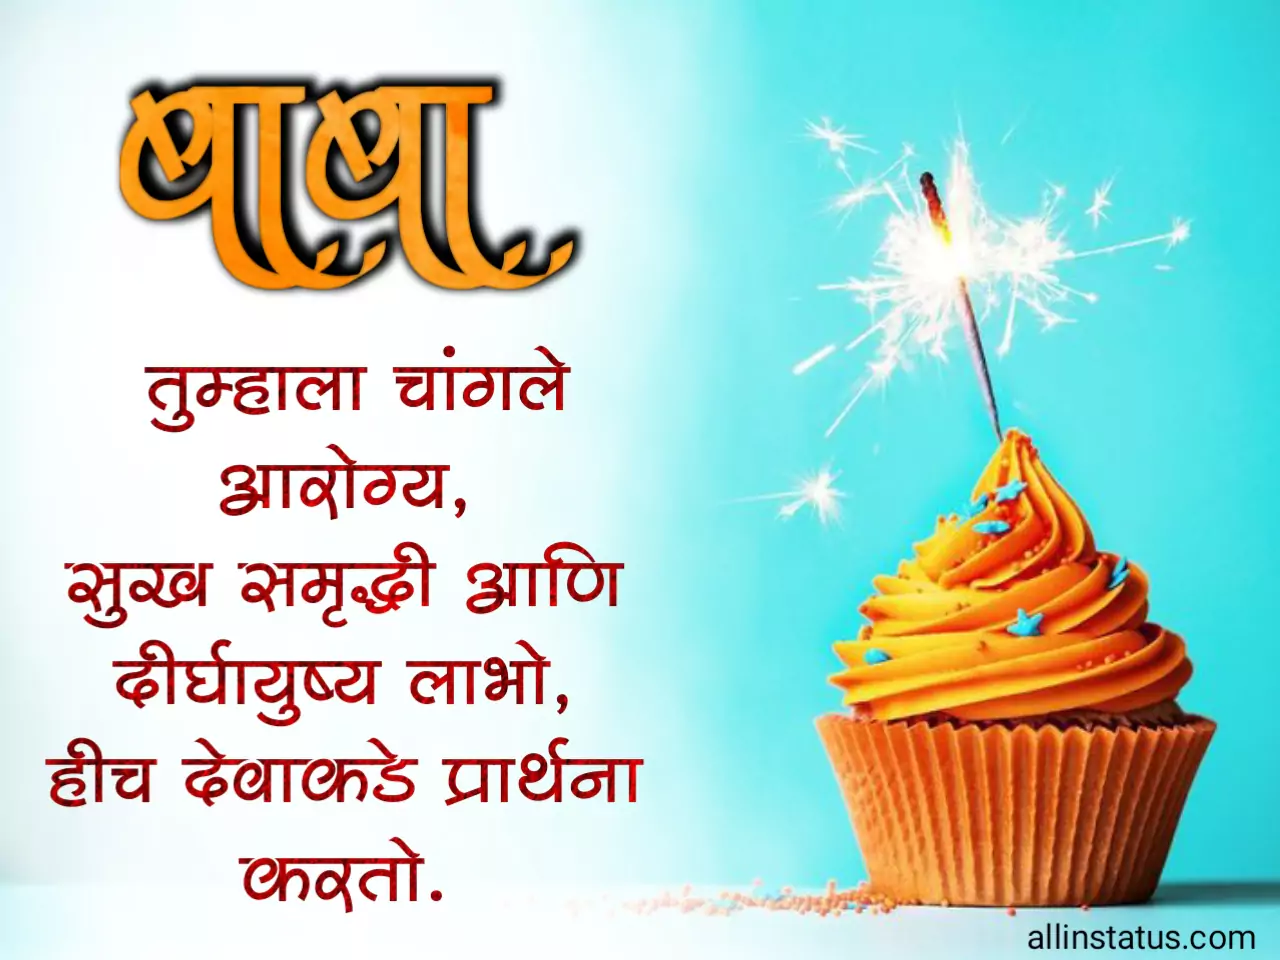 Happy Birthday Image for father in marathi